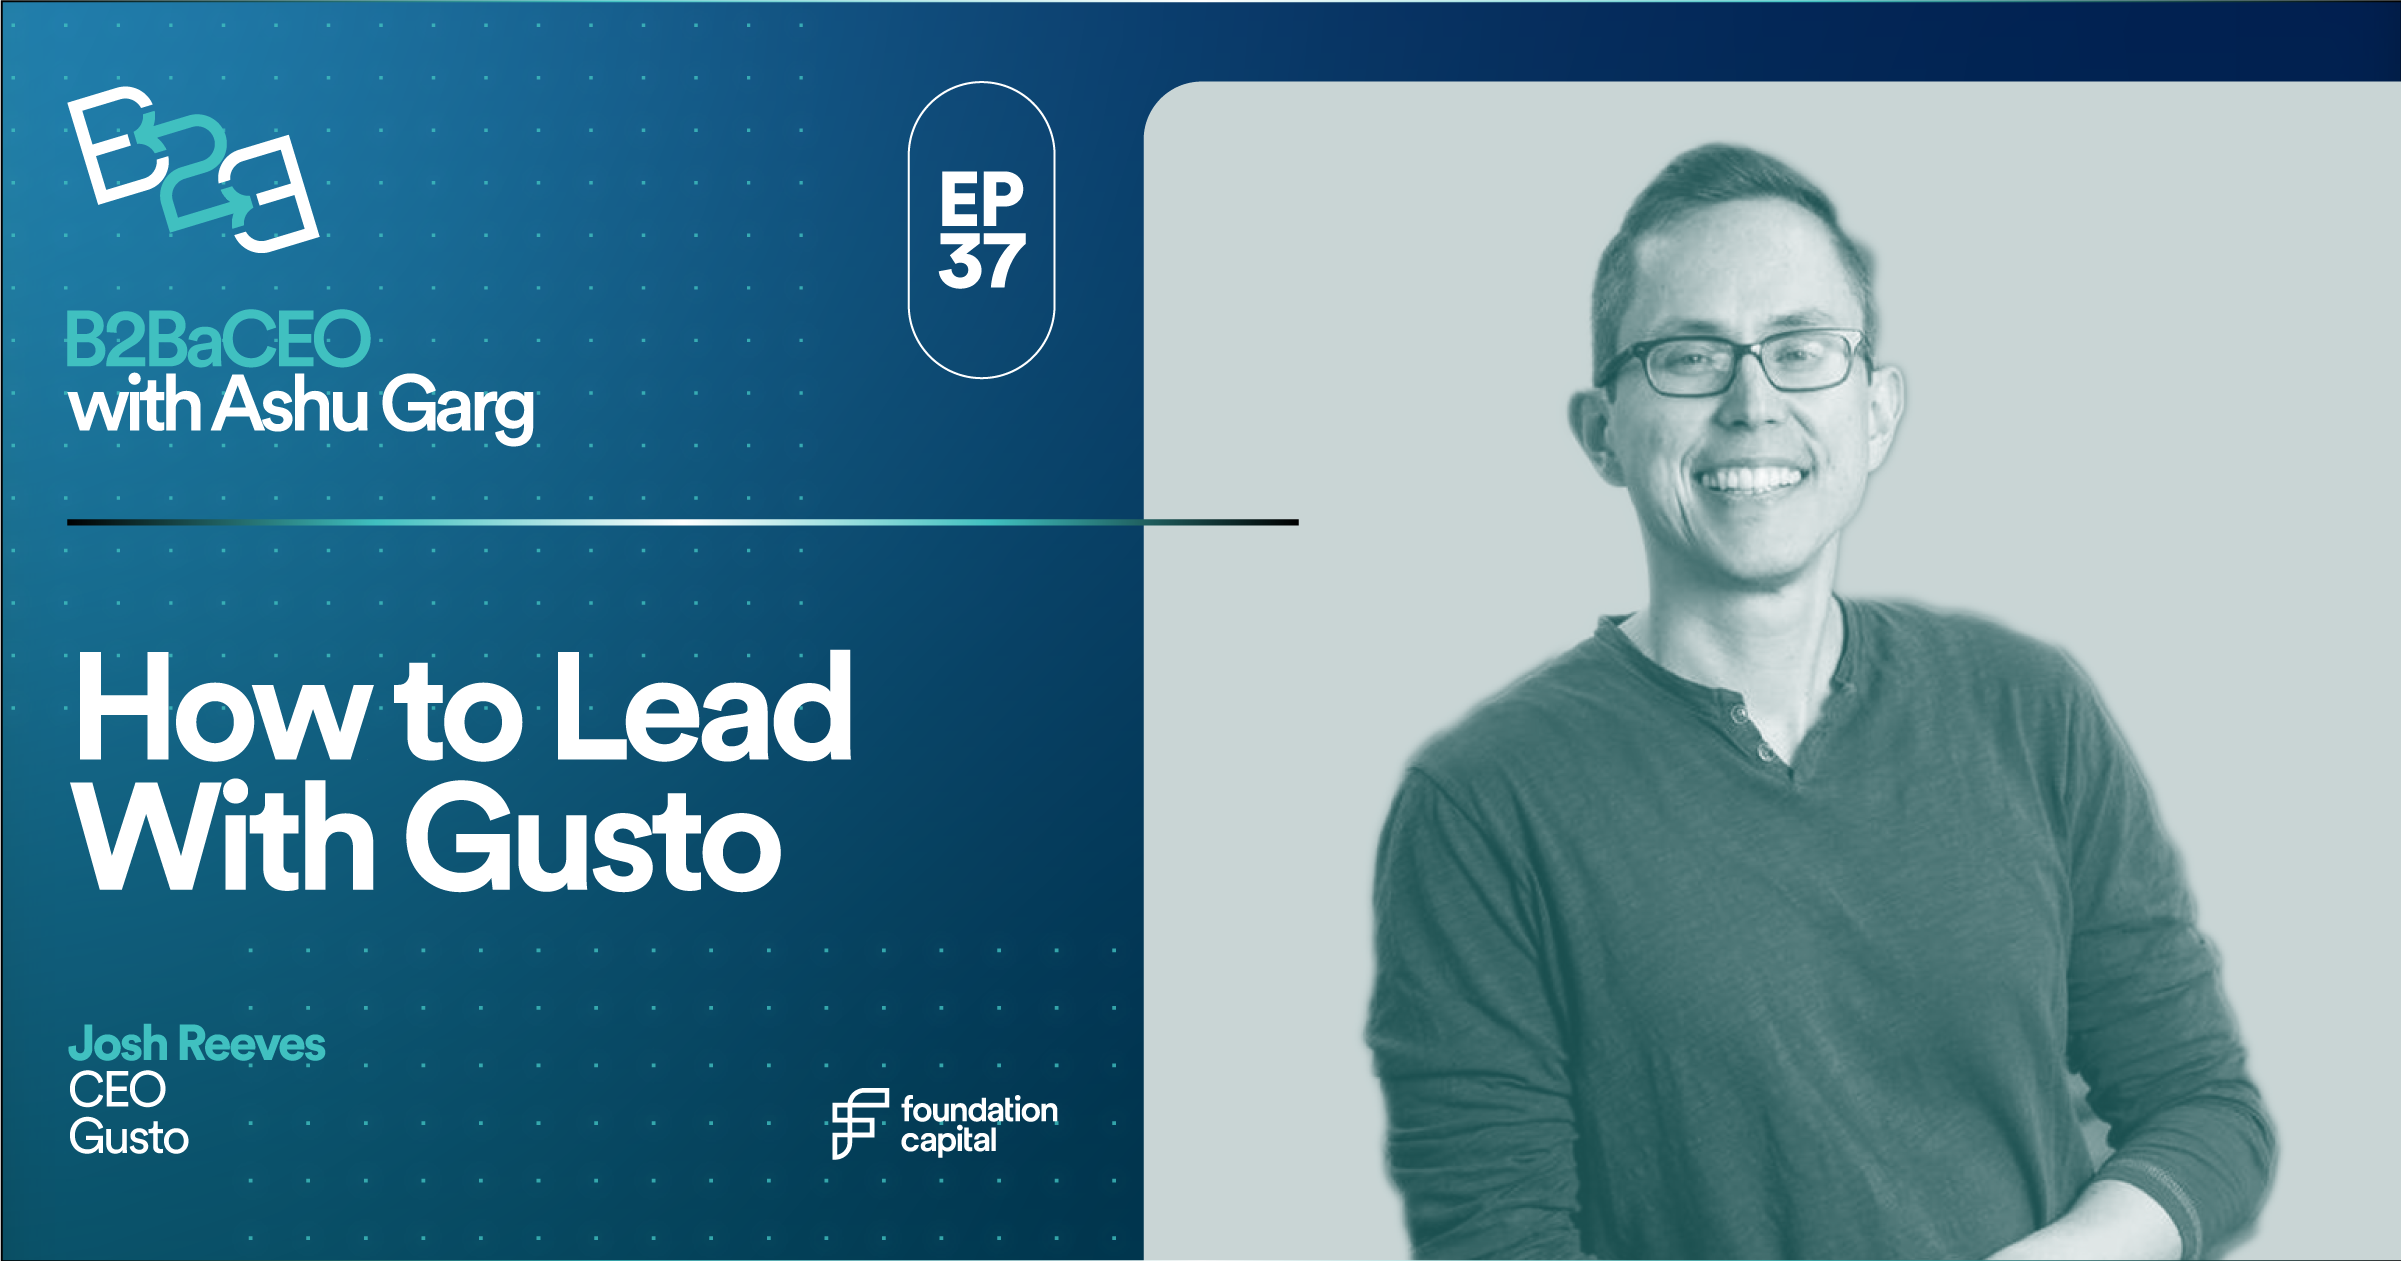 Josh Reeves CEO at Gusto, on how to lead with gusto